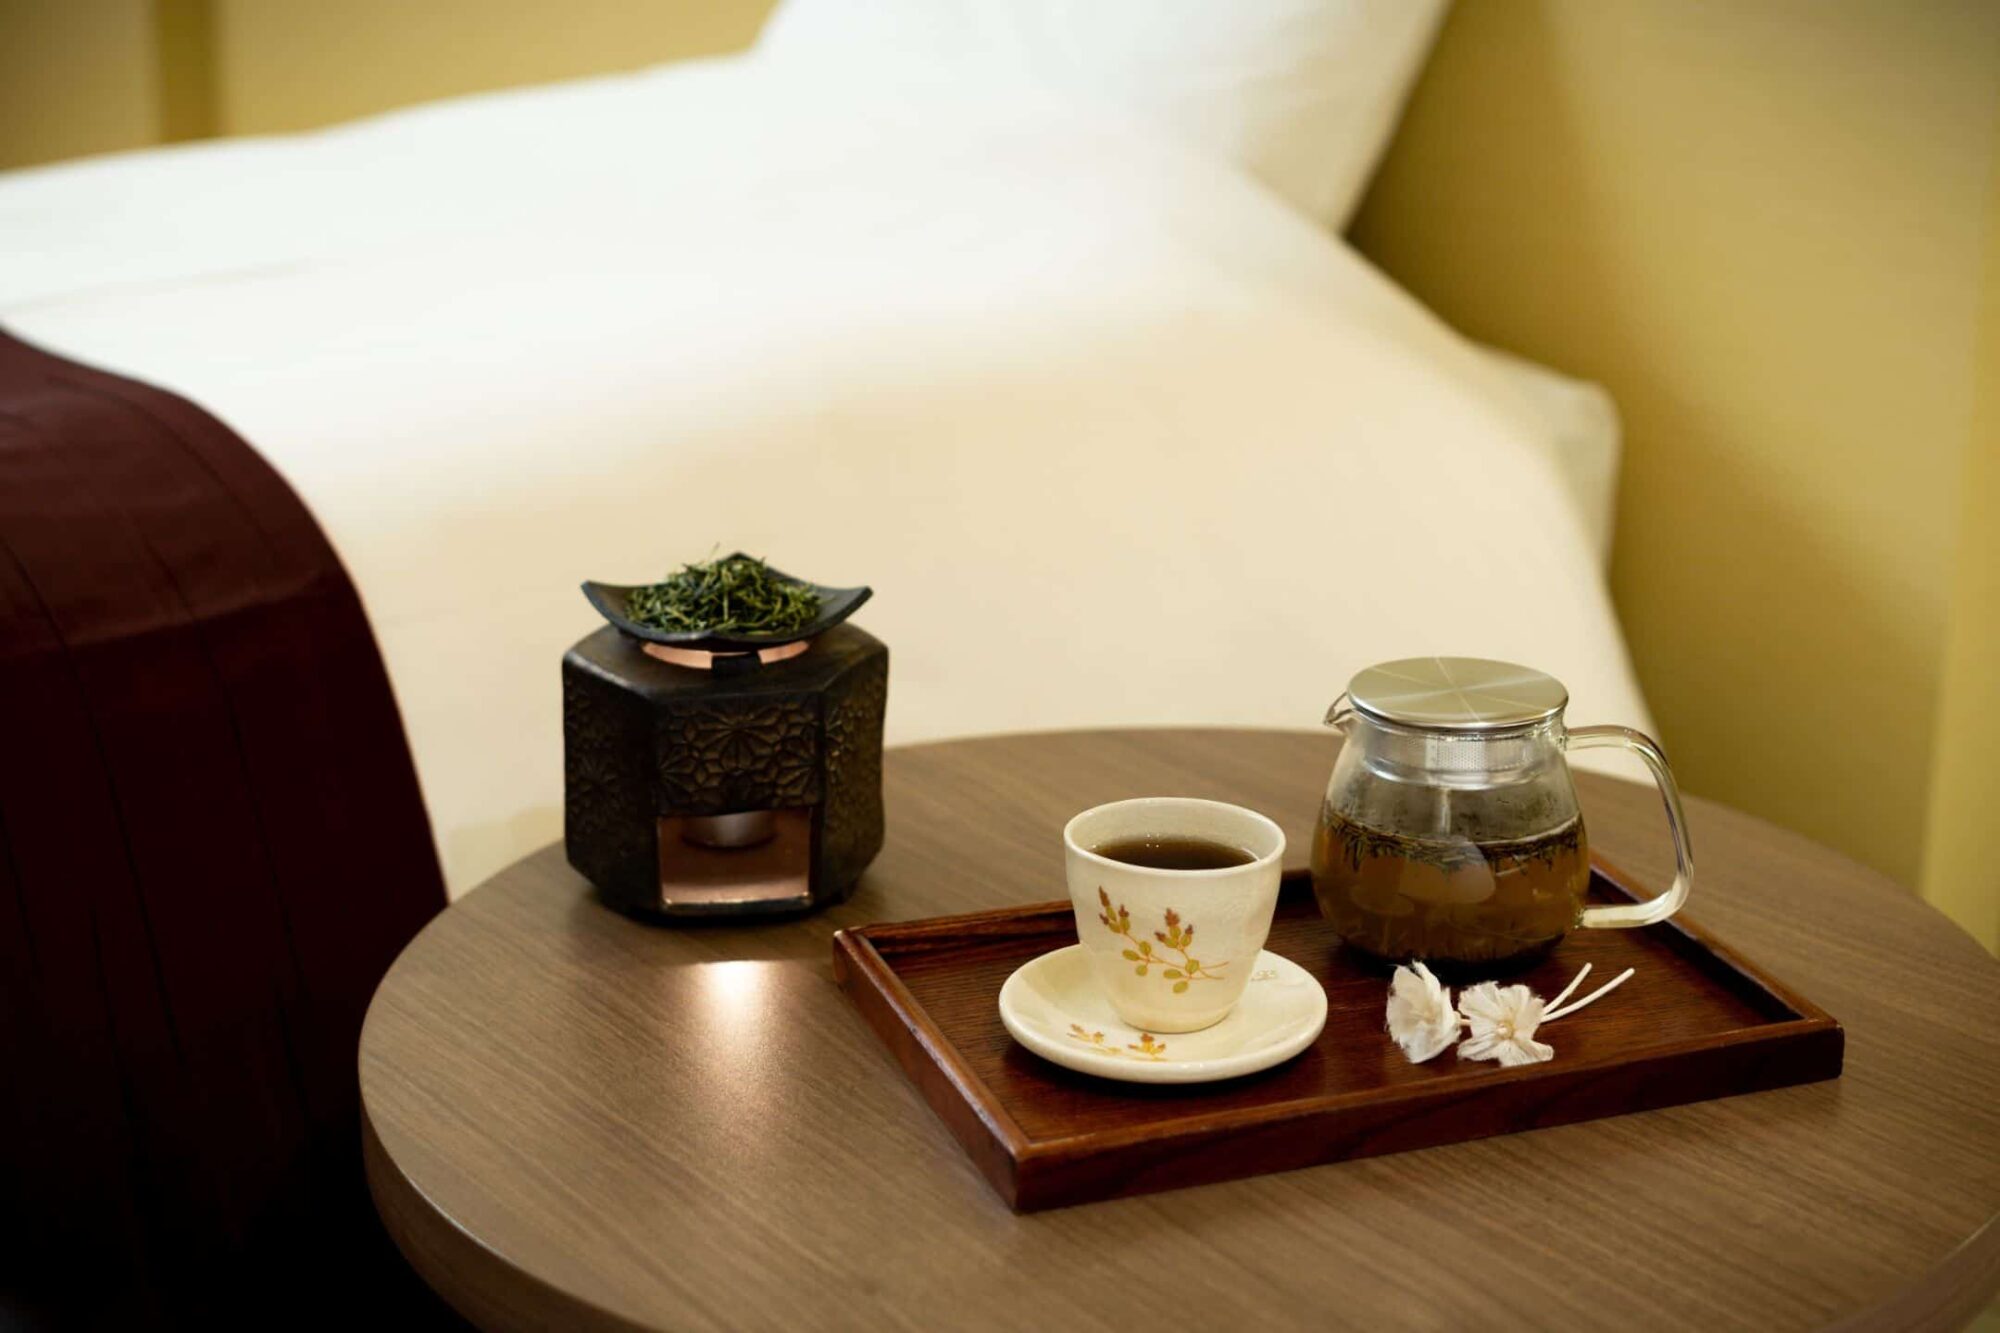 At night, drink Hojicha, which has a highly relaxing effect, to warm your body